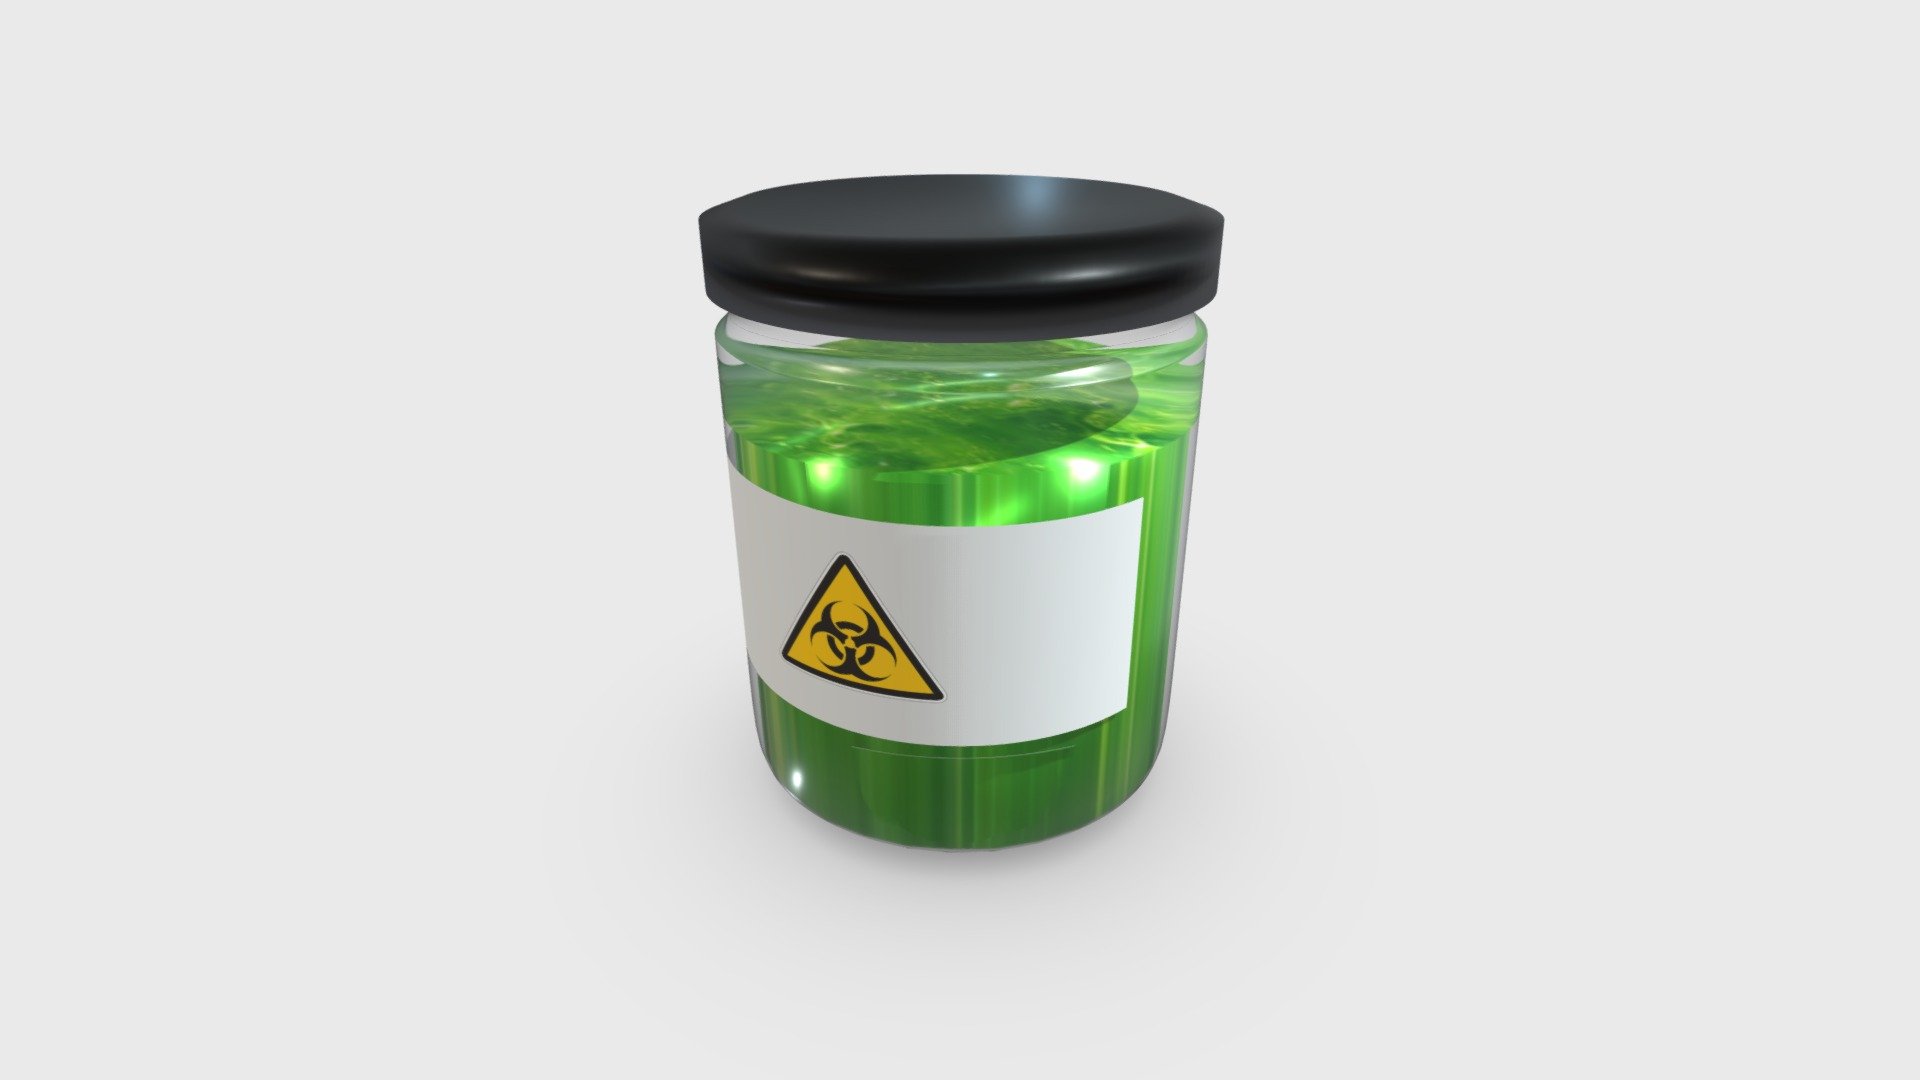 This is model of toxic substanse.

Including blend and FBX formats. 

Low Poly - Game Ready

 Edges 568/1,184

Vertices 350/608 

Faces 219/578

Triangles 1,212

Textures are seamless

Create in Blender 3.4.1
 - Toxic substance - 3D model by Park.Liya (@kofurelia) 3d model